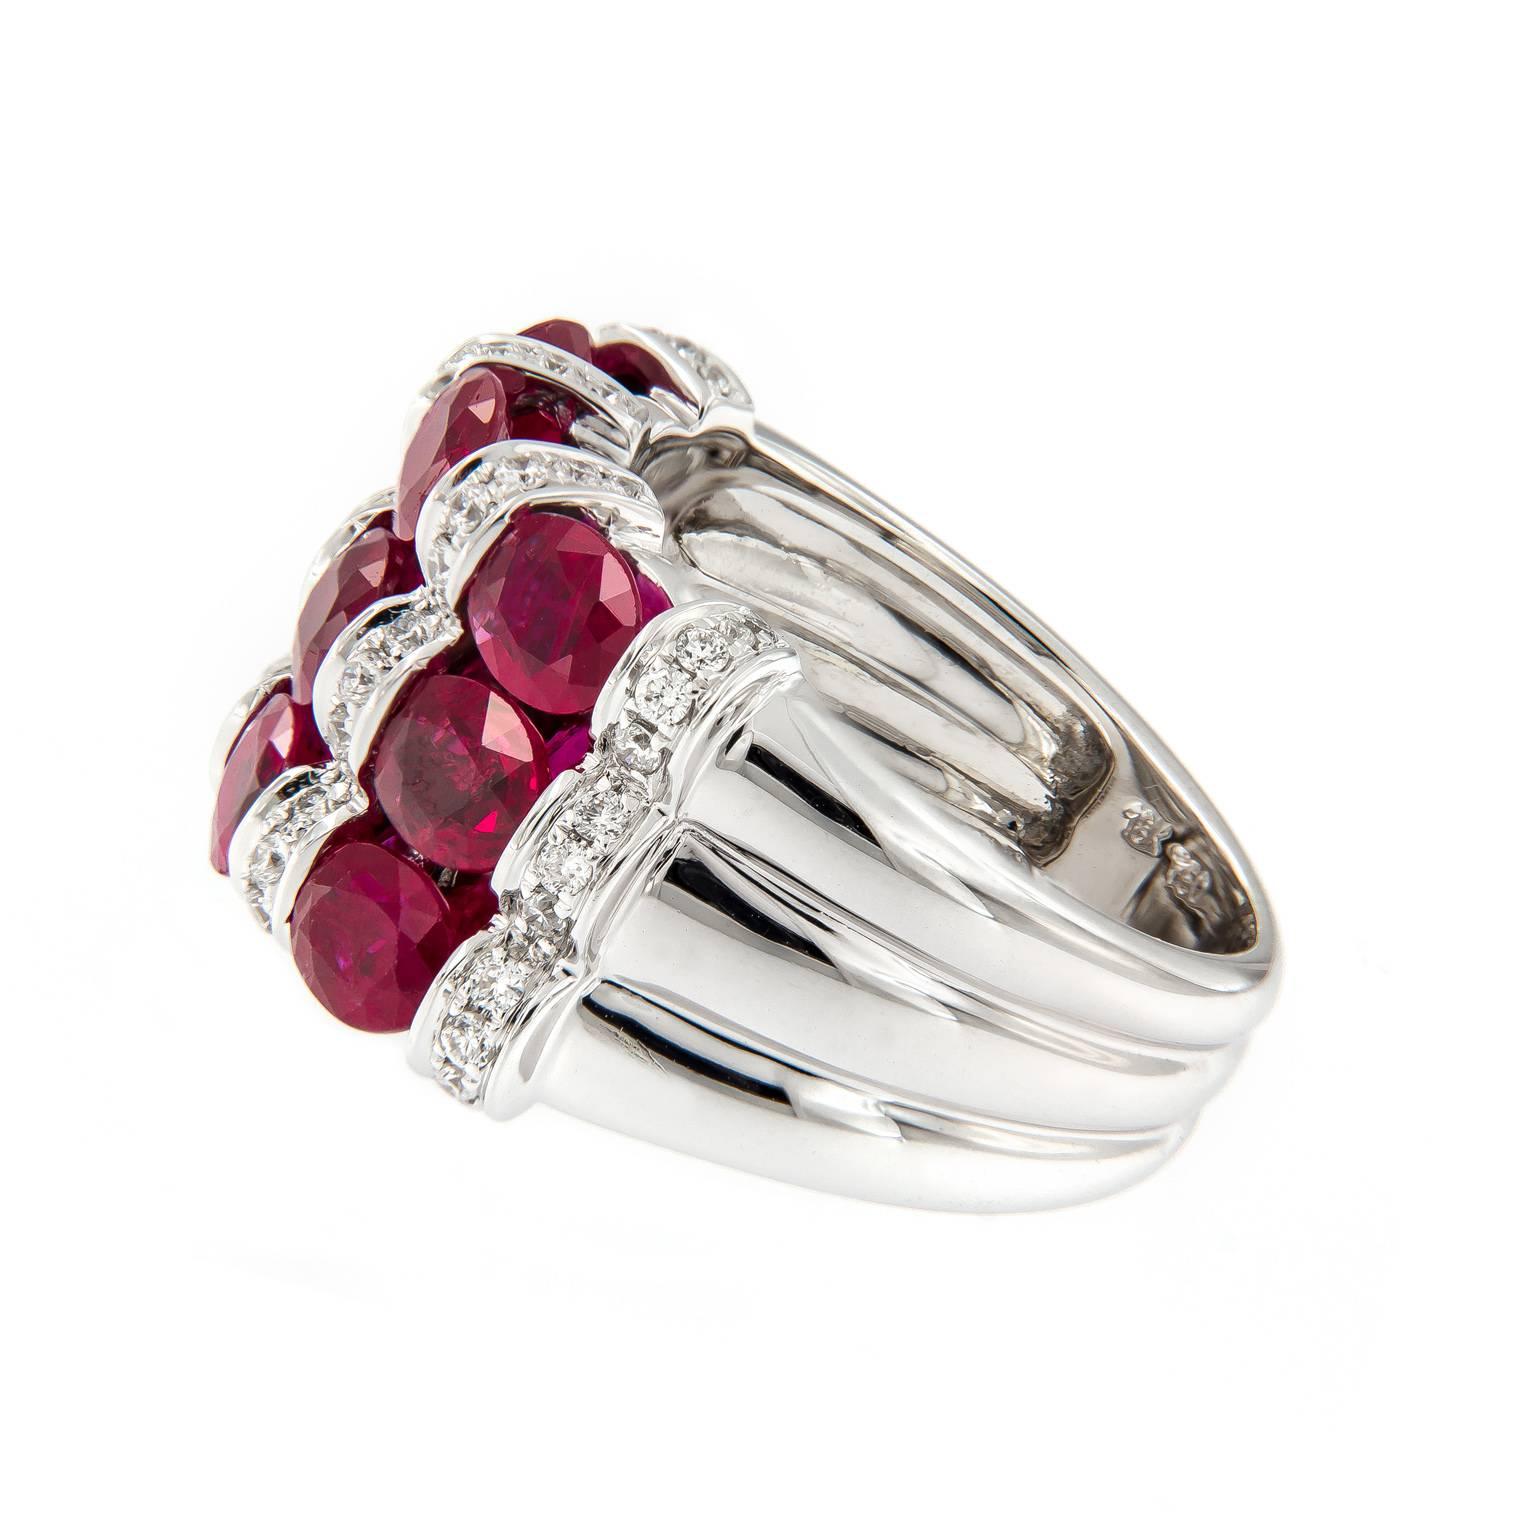 Alternate rows of contrasting mixture of oval rubies and pave set diamonds create a stunning look. This beautiful statement ring is crafted in 18k white gold.
Ring size 6.75. 13 mm wide.

Rubies 3.95 cttw
Diamonds 0.40 cttw